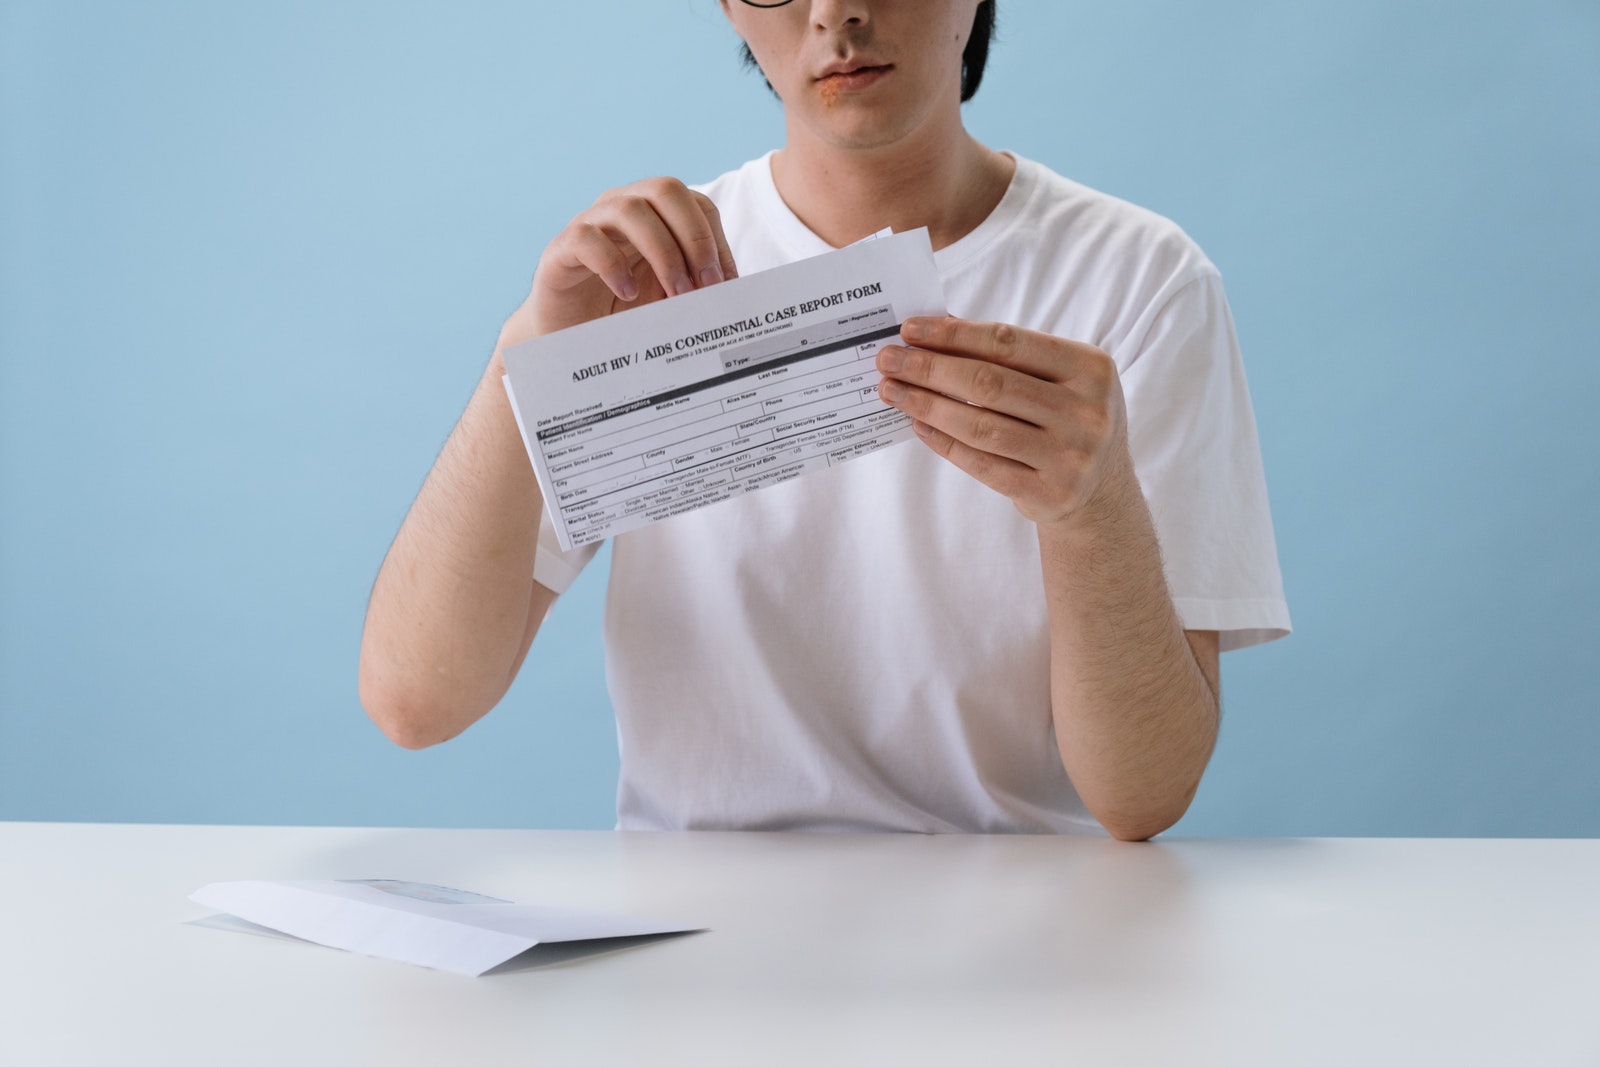 Man in White T-shirt Holding HIV/AIDS Paper Form